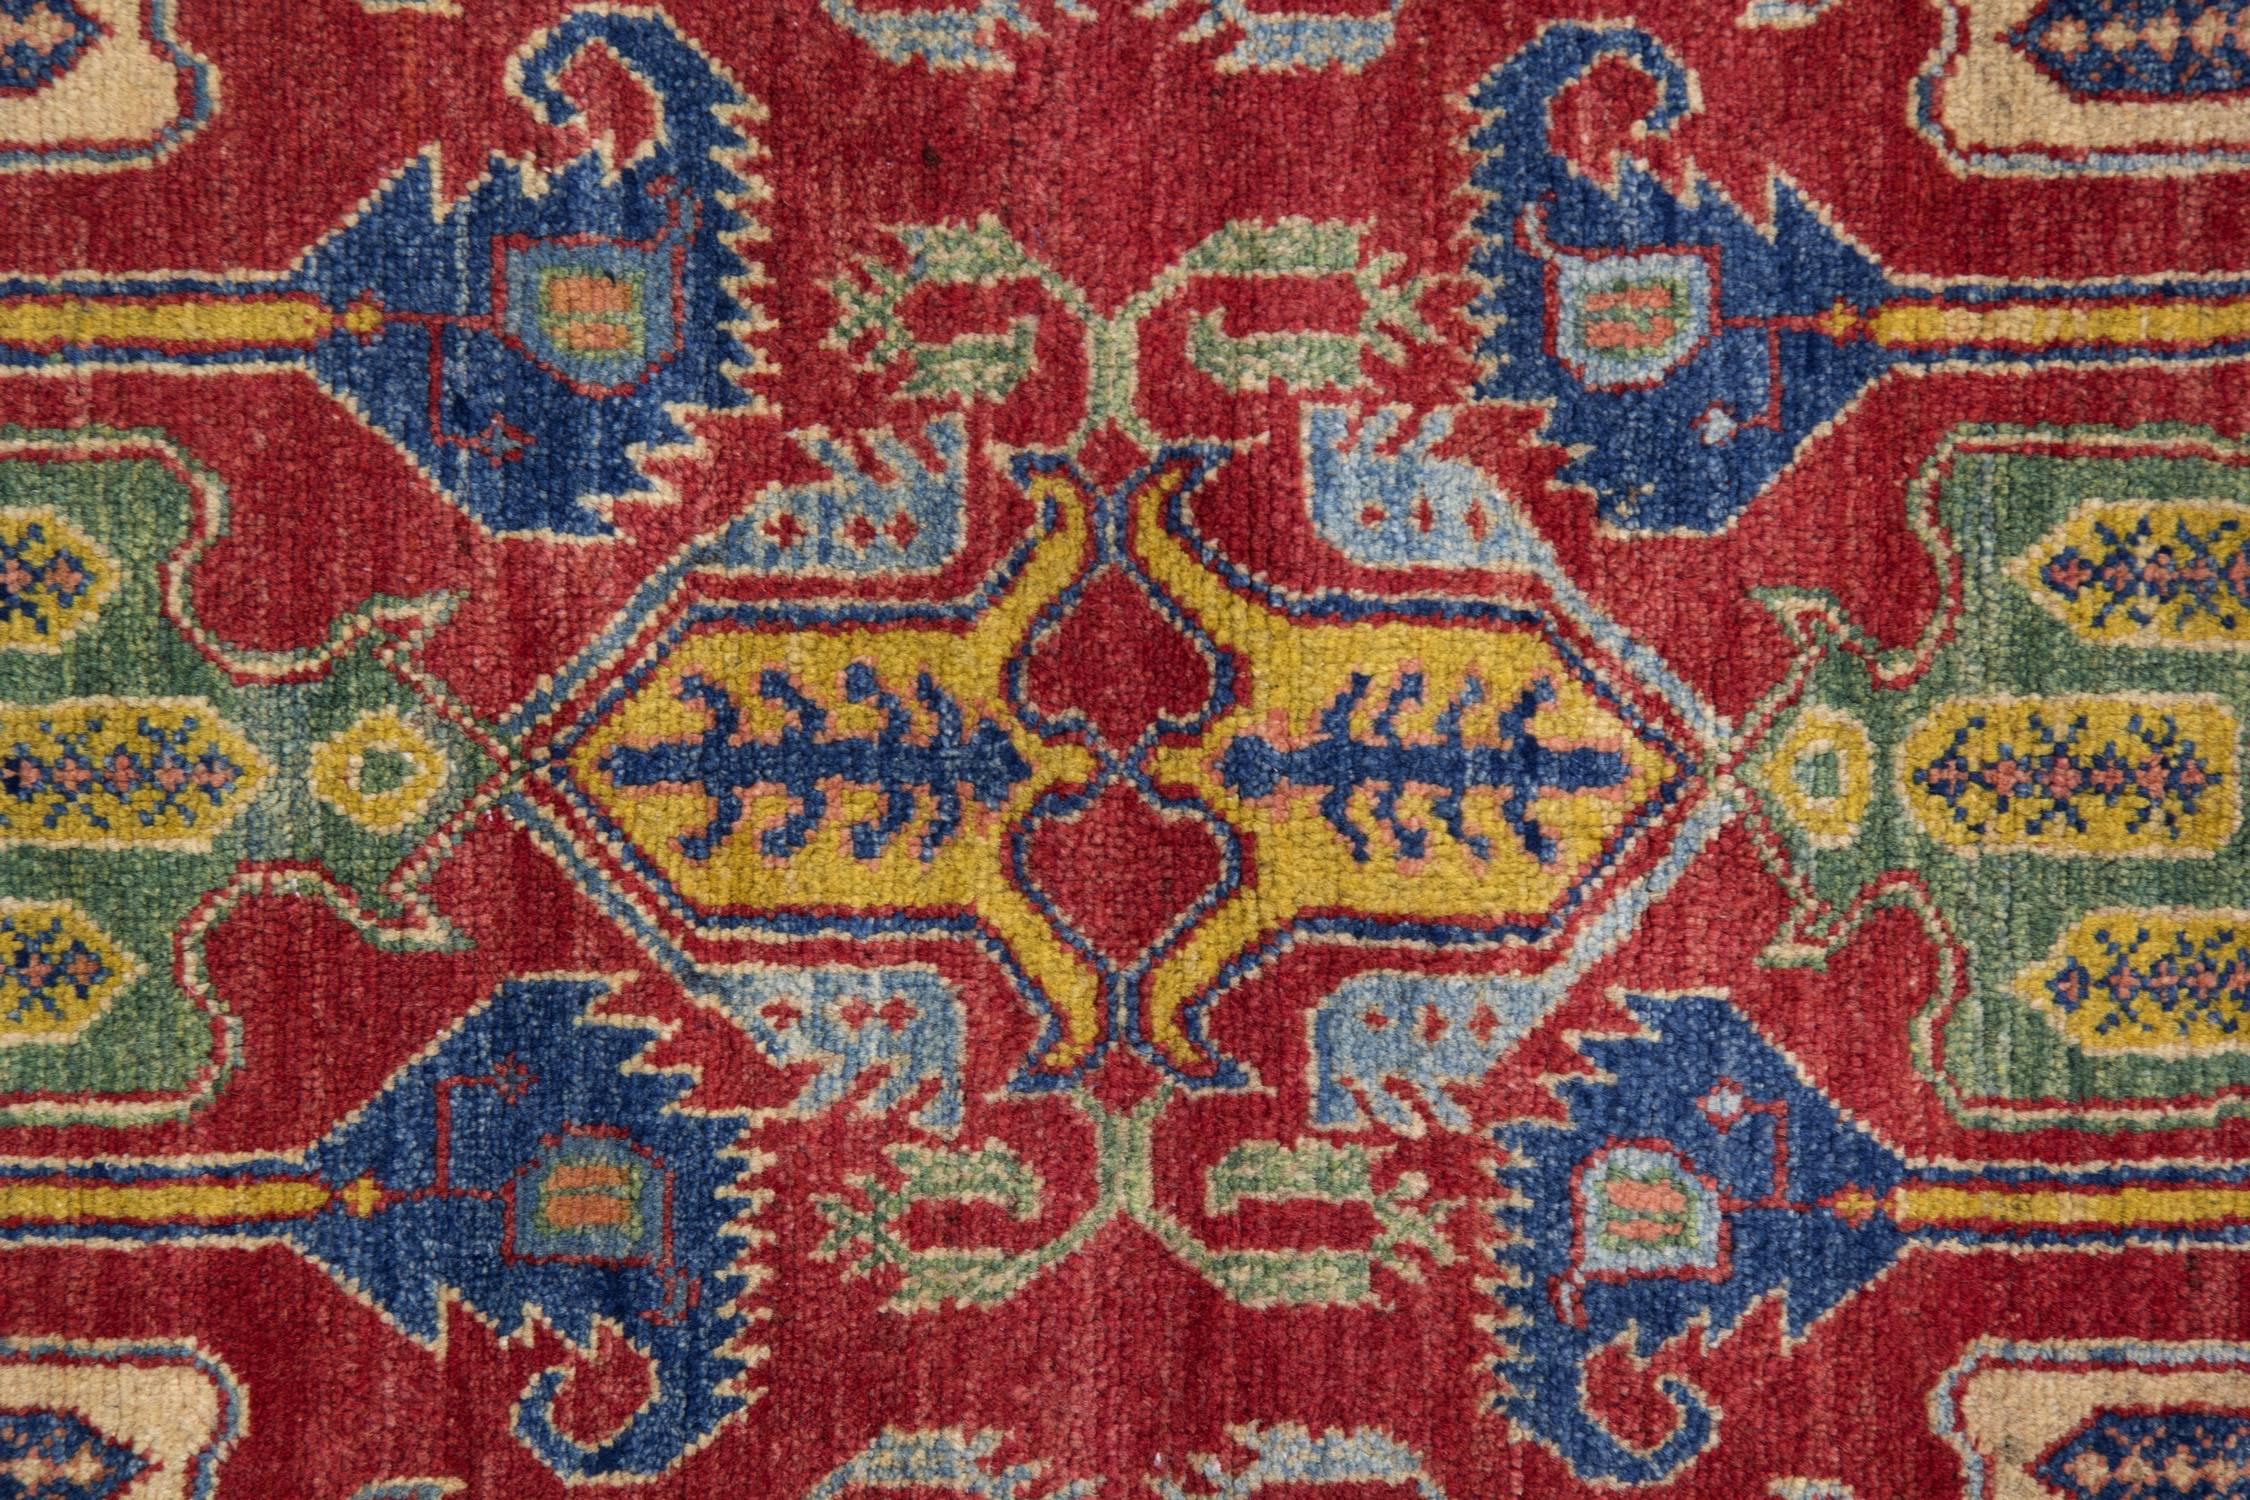 Hand-Knotted Handmade Rugs, Red Afghan Geometric Rugs, Carpet for Sale 182 x 265 cm  For Sale